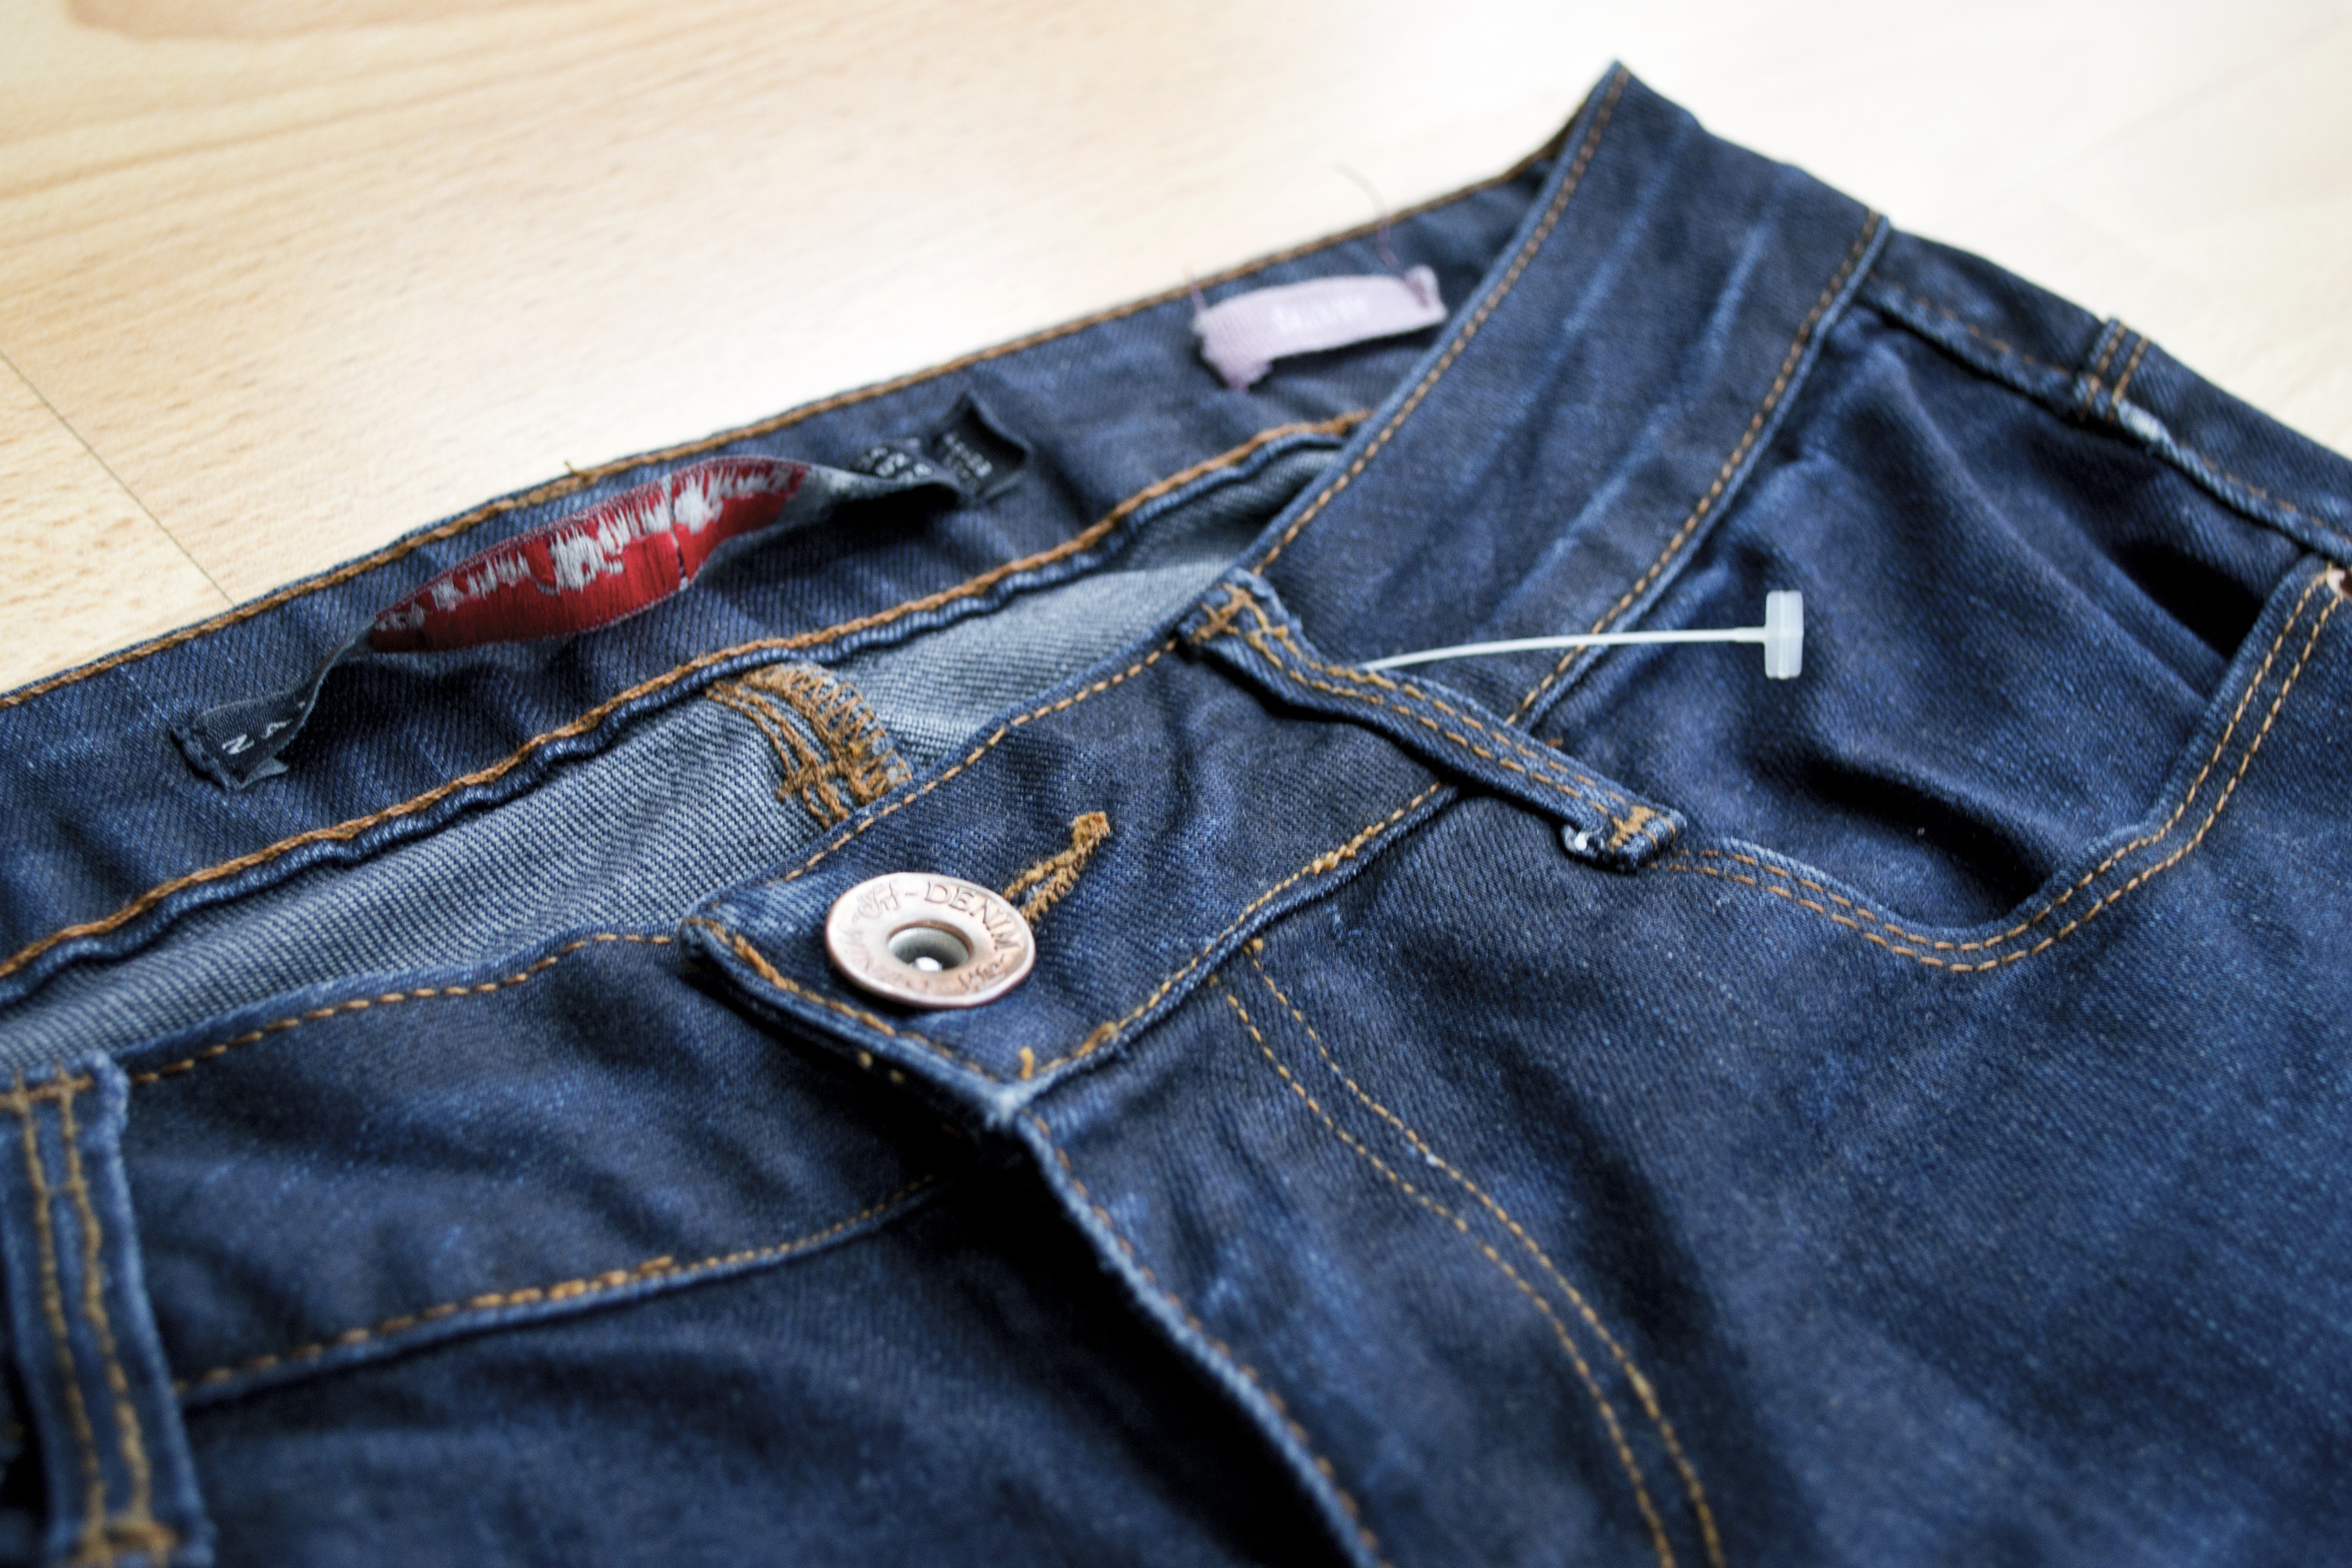 How to Prevent Your Jeans from Bleeding in the Wash